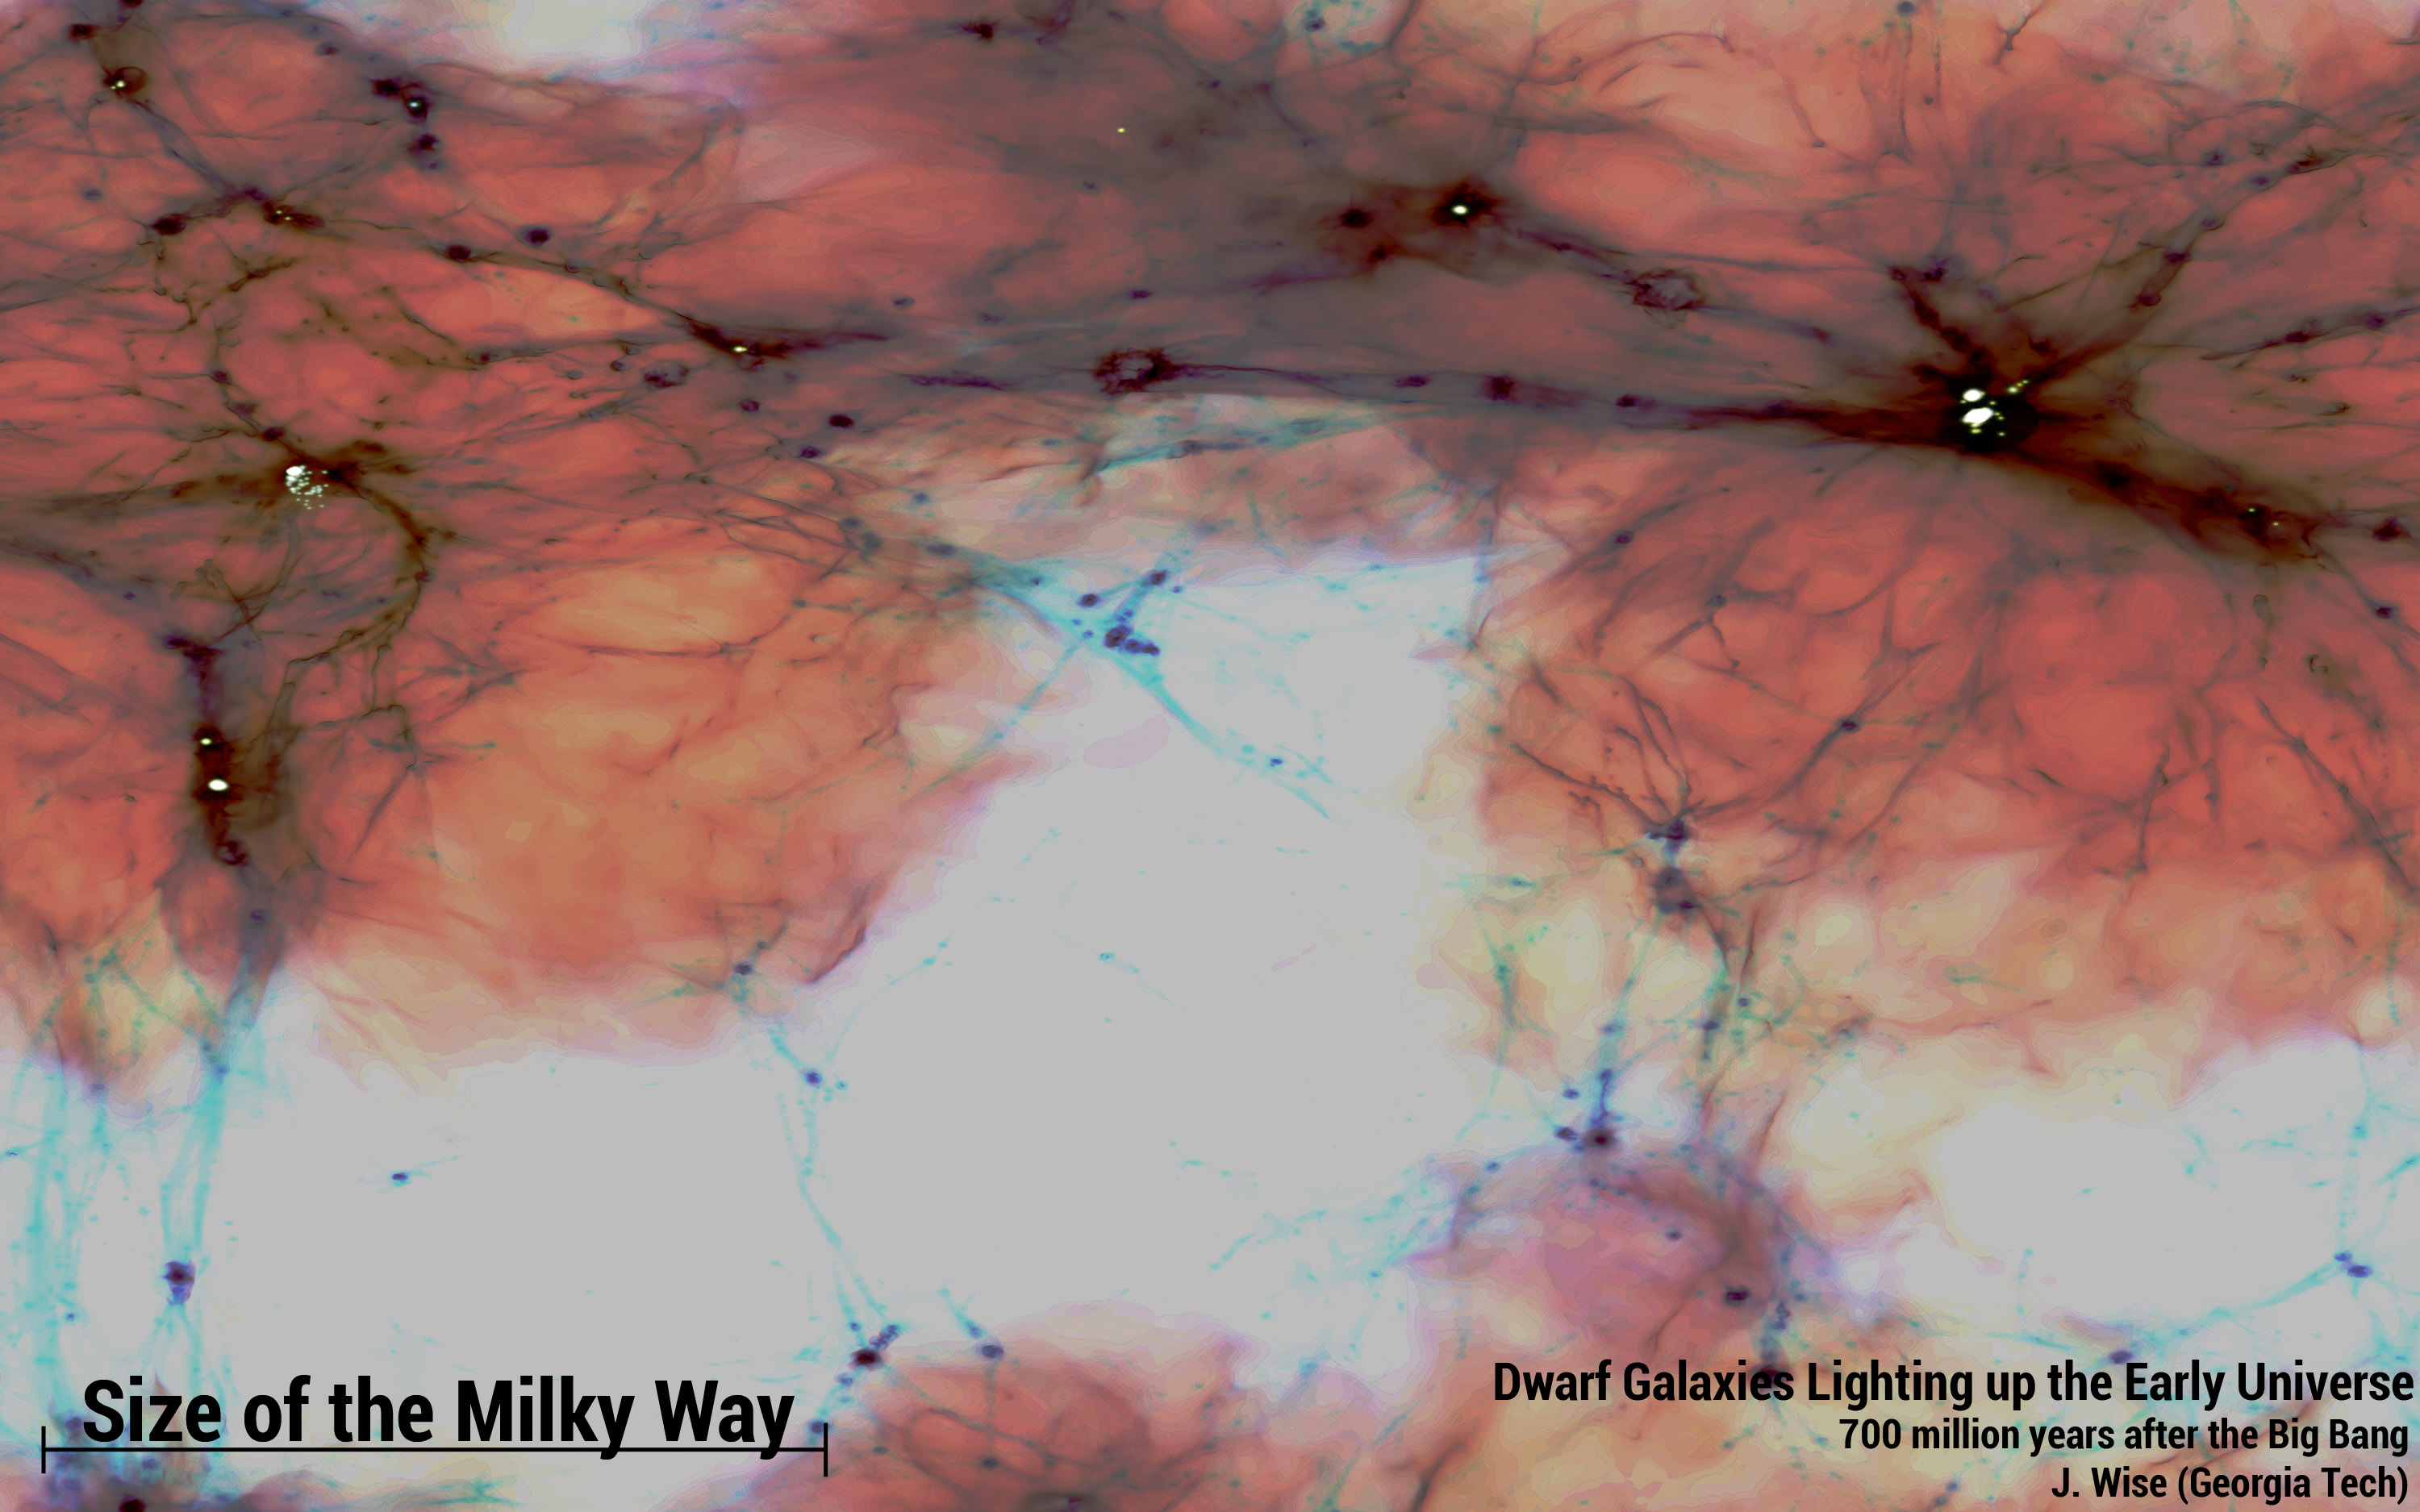 A view of the entire simulation volume that shows the large-scale structure of the gas distribution in filaments and clumps. The red regions are heated by stellar UV light coming from the galaxies,  highlighted in white. These galaxies are over 1000 times less massive than the Milky Way and contributed nearly one-third of the UV light during reionization. The field of view of this image is 400,000 light years across when the universe was only 700 million years old.